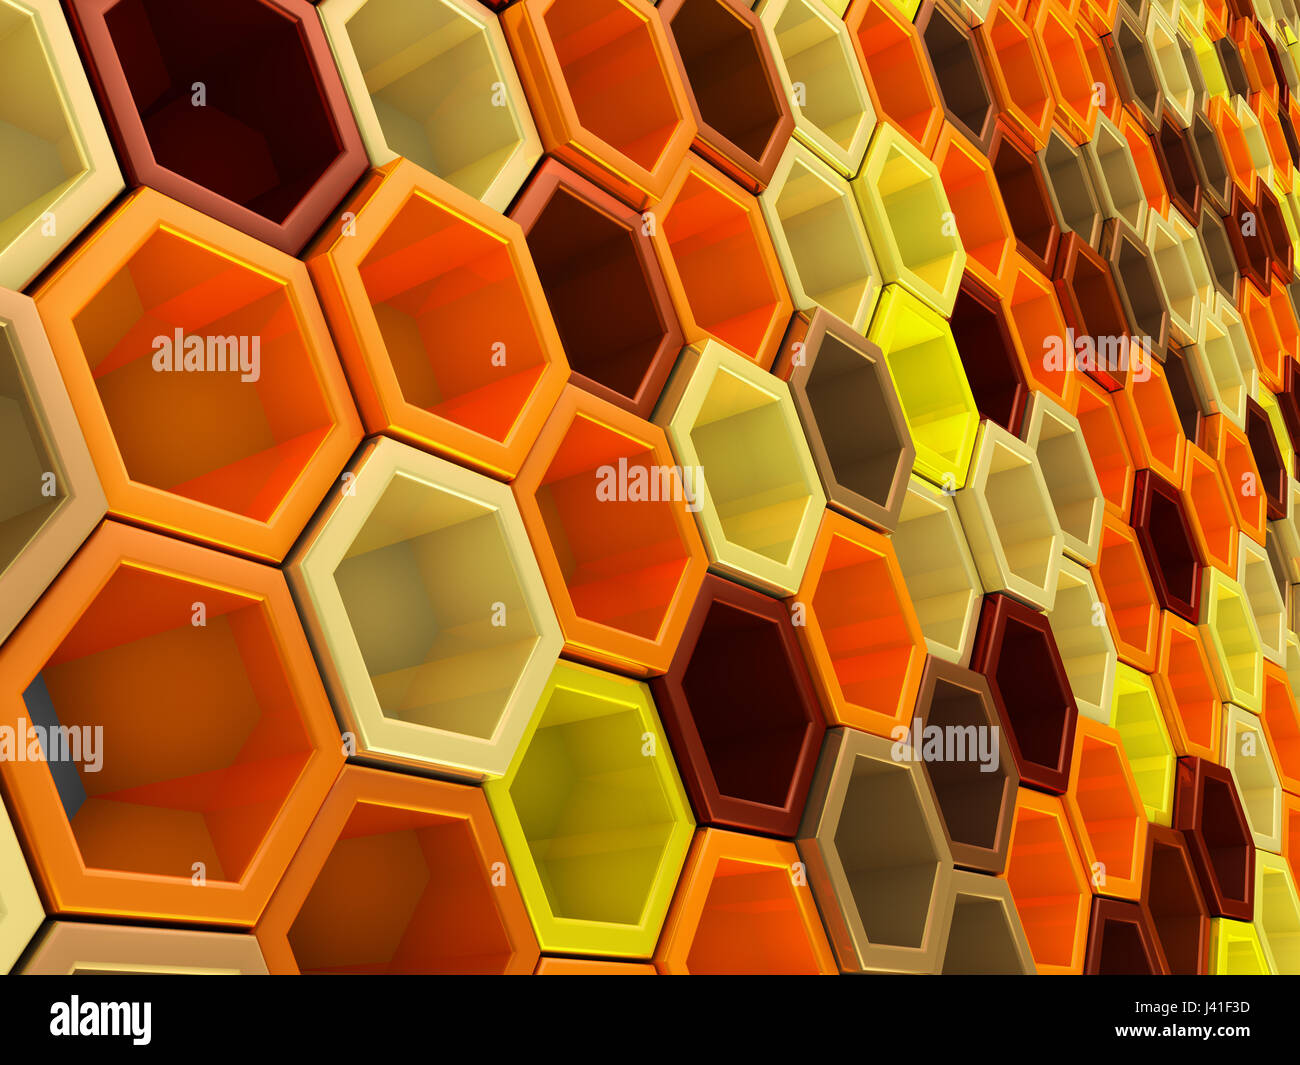 A network of hexagons yellow hue, which change height. 3D render. Stock Photo